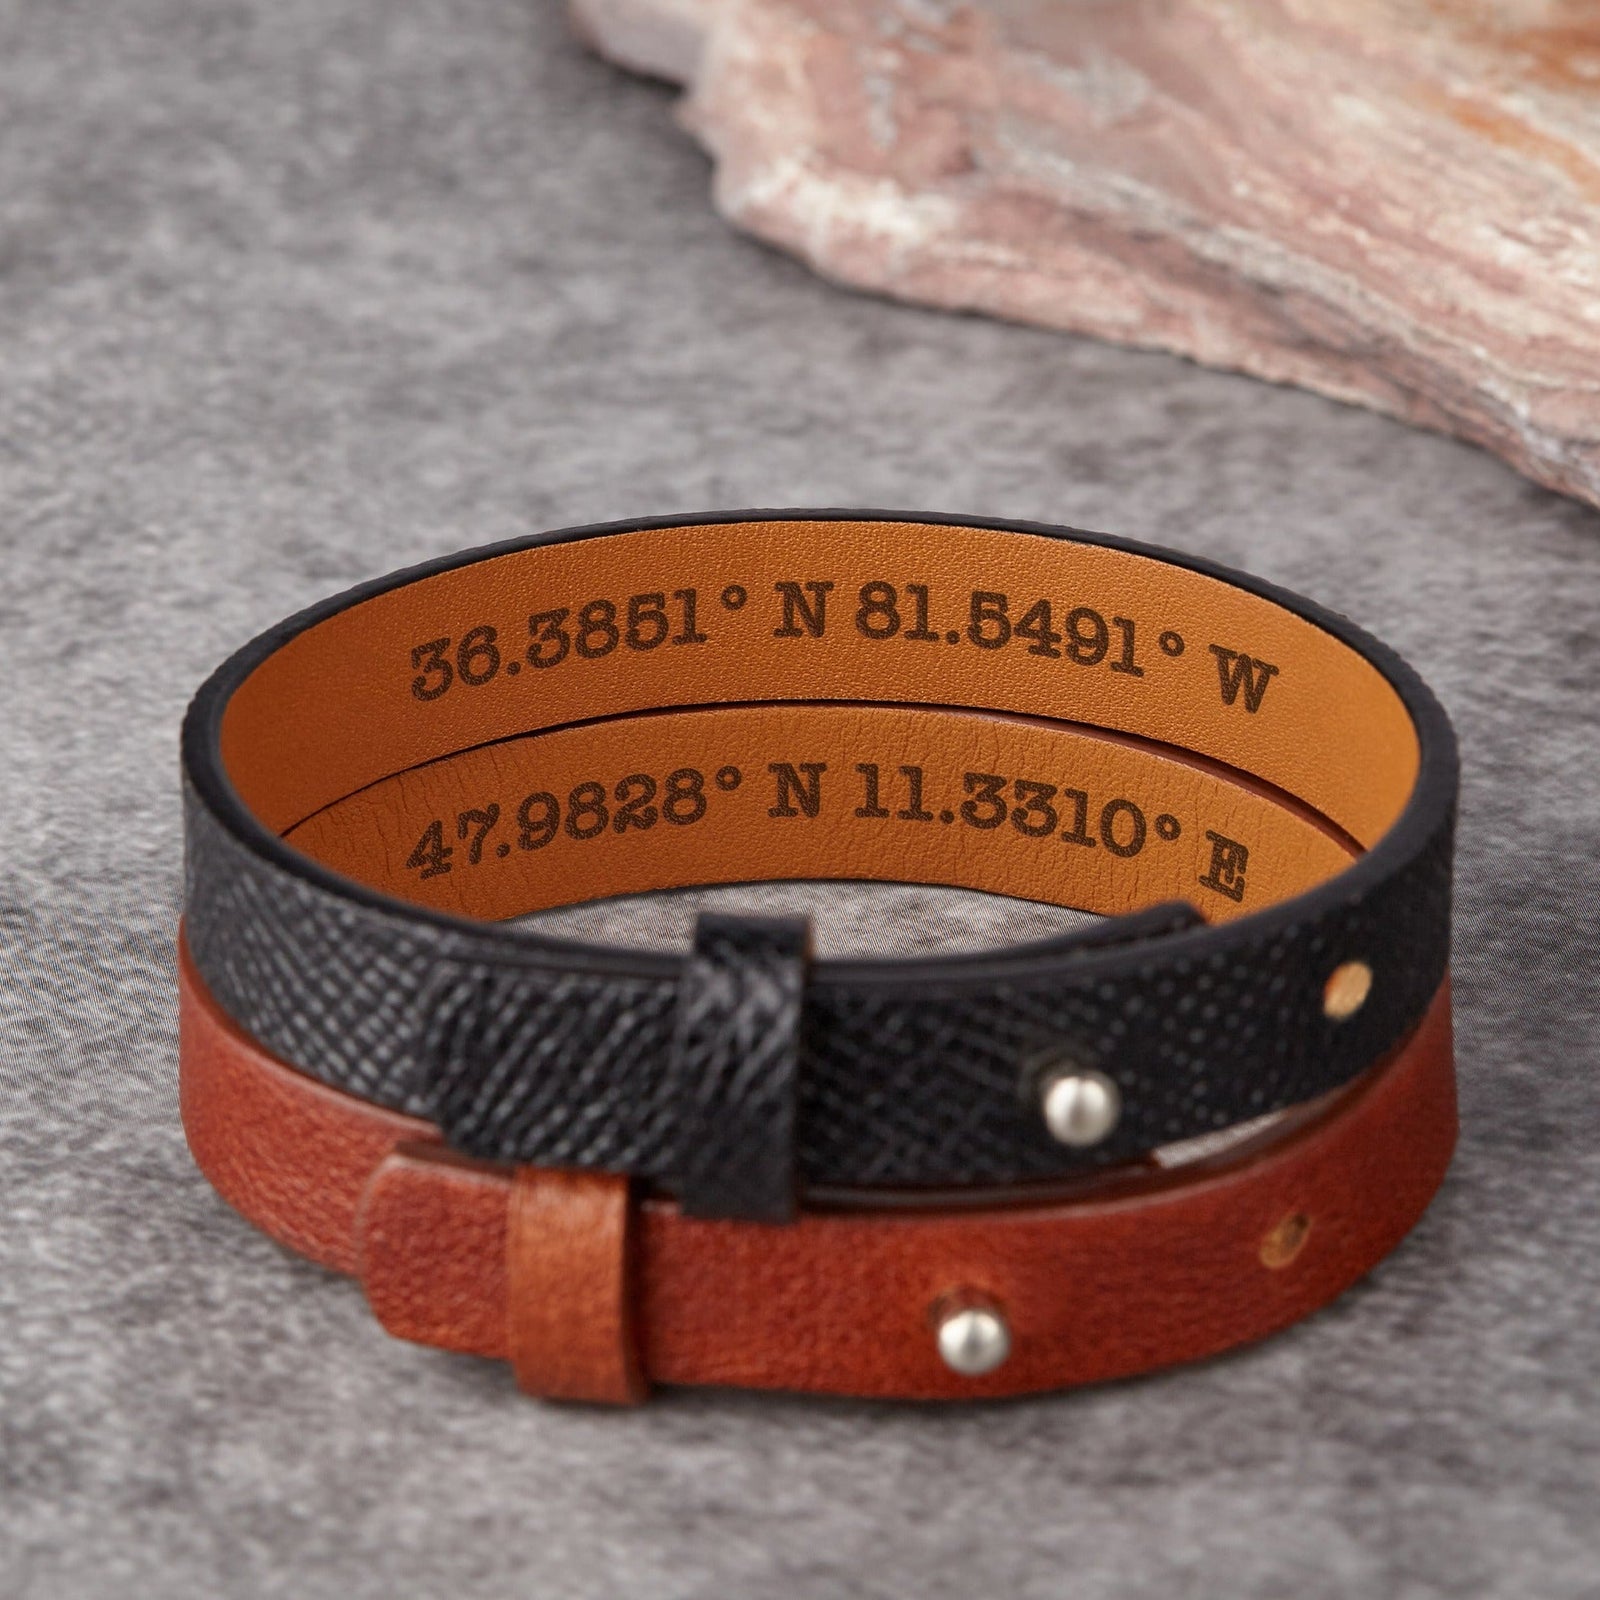 Custom Engraved Leather Bracelets for Couples, Personalized With Names and  Date, His and Hers Matching Set of 2, Perfect Gift for Boyfriend - Etsy